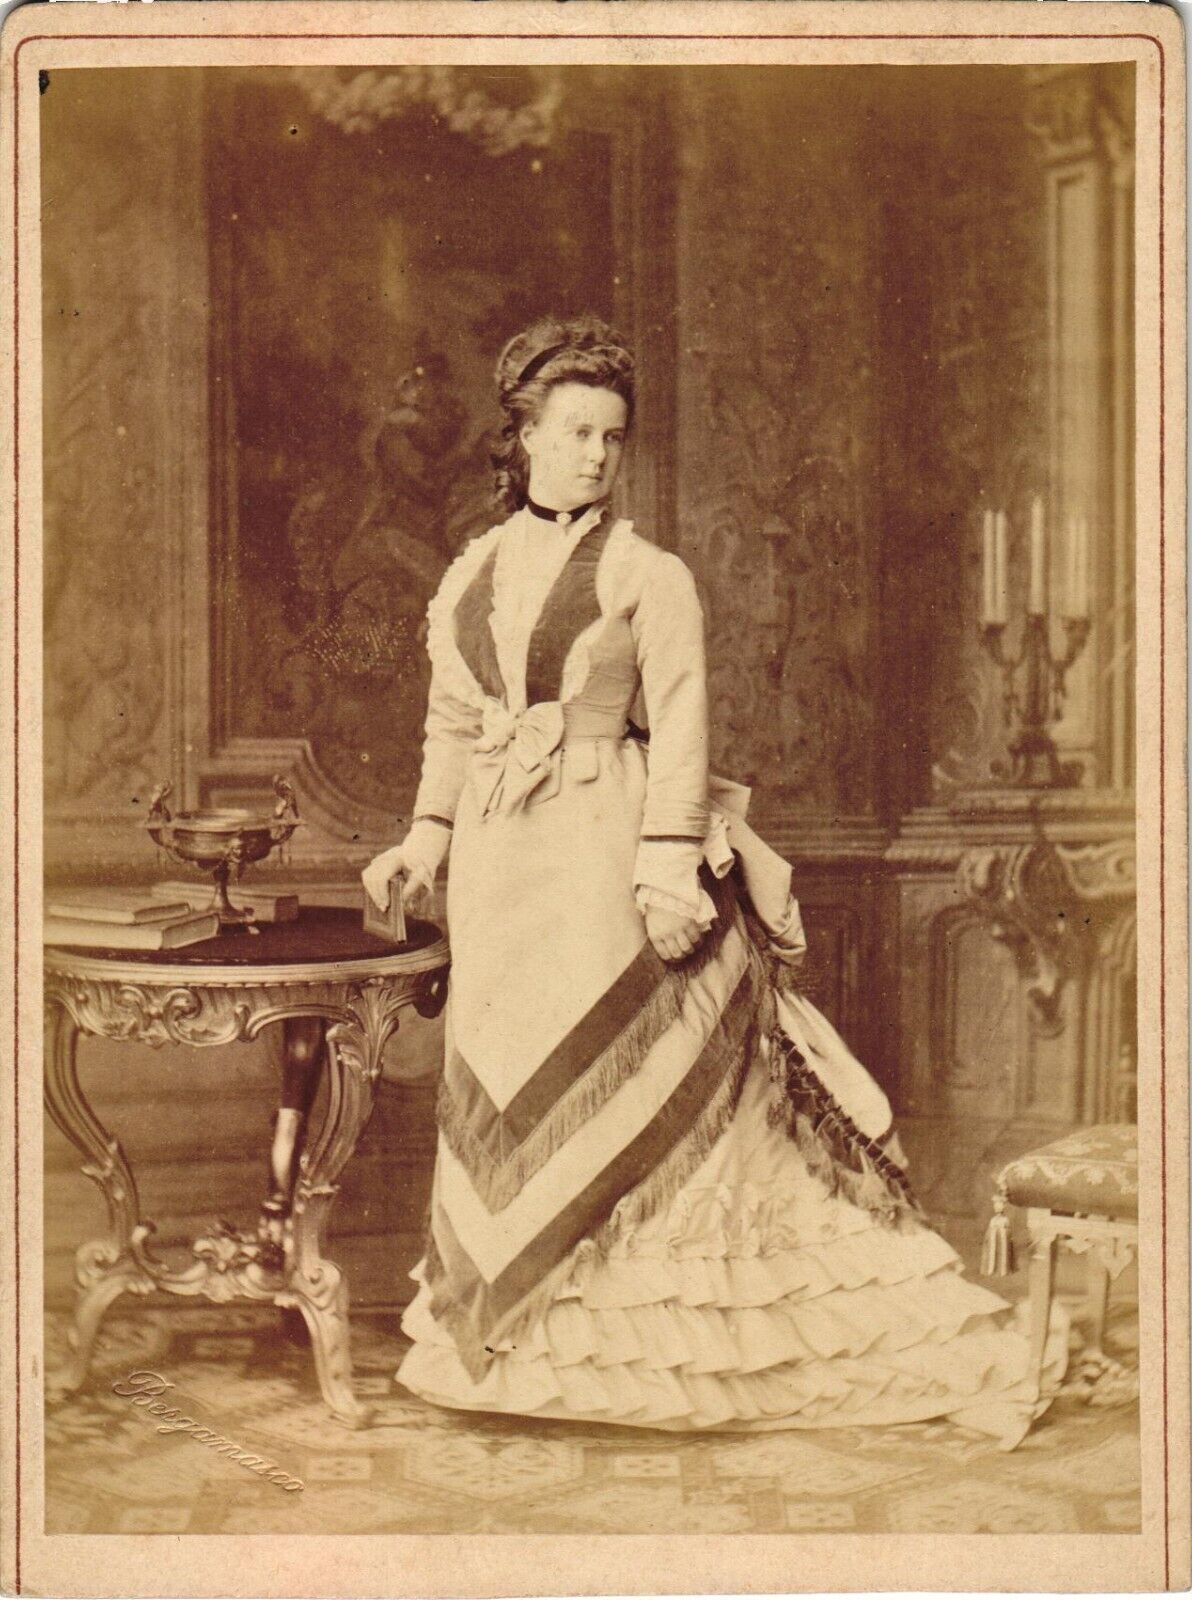 ROYAL Vintage Cabinet Card -Grand Duchess Maria Alexandrovna of Russia 1853-1920